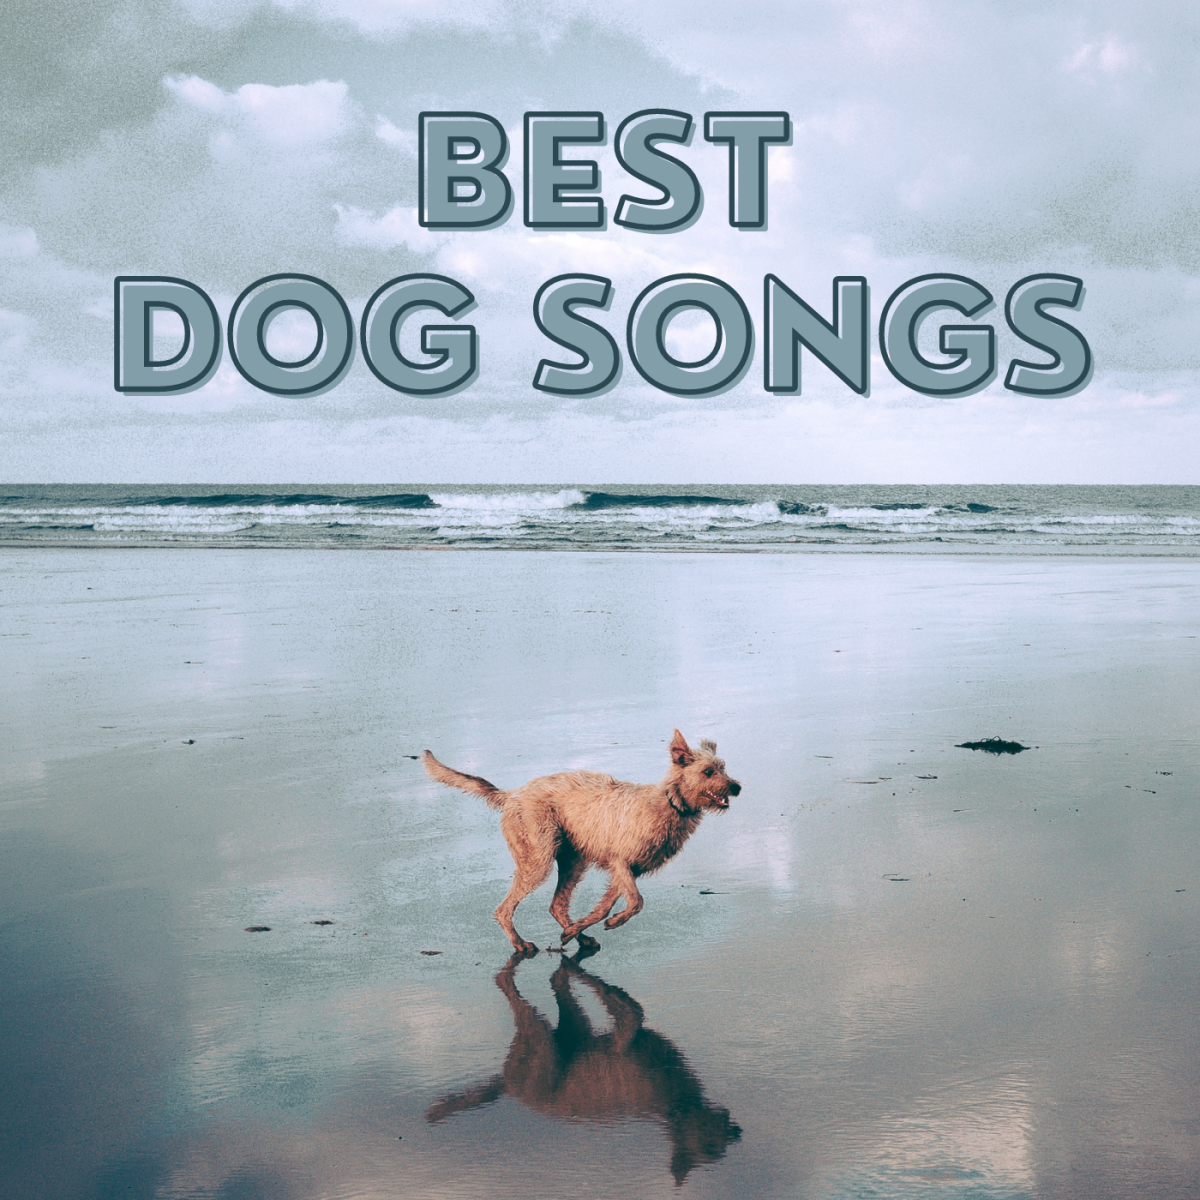 Check out my top six songs for celebrating our canine companions.